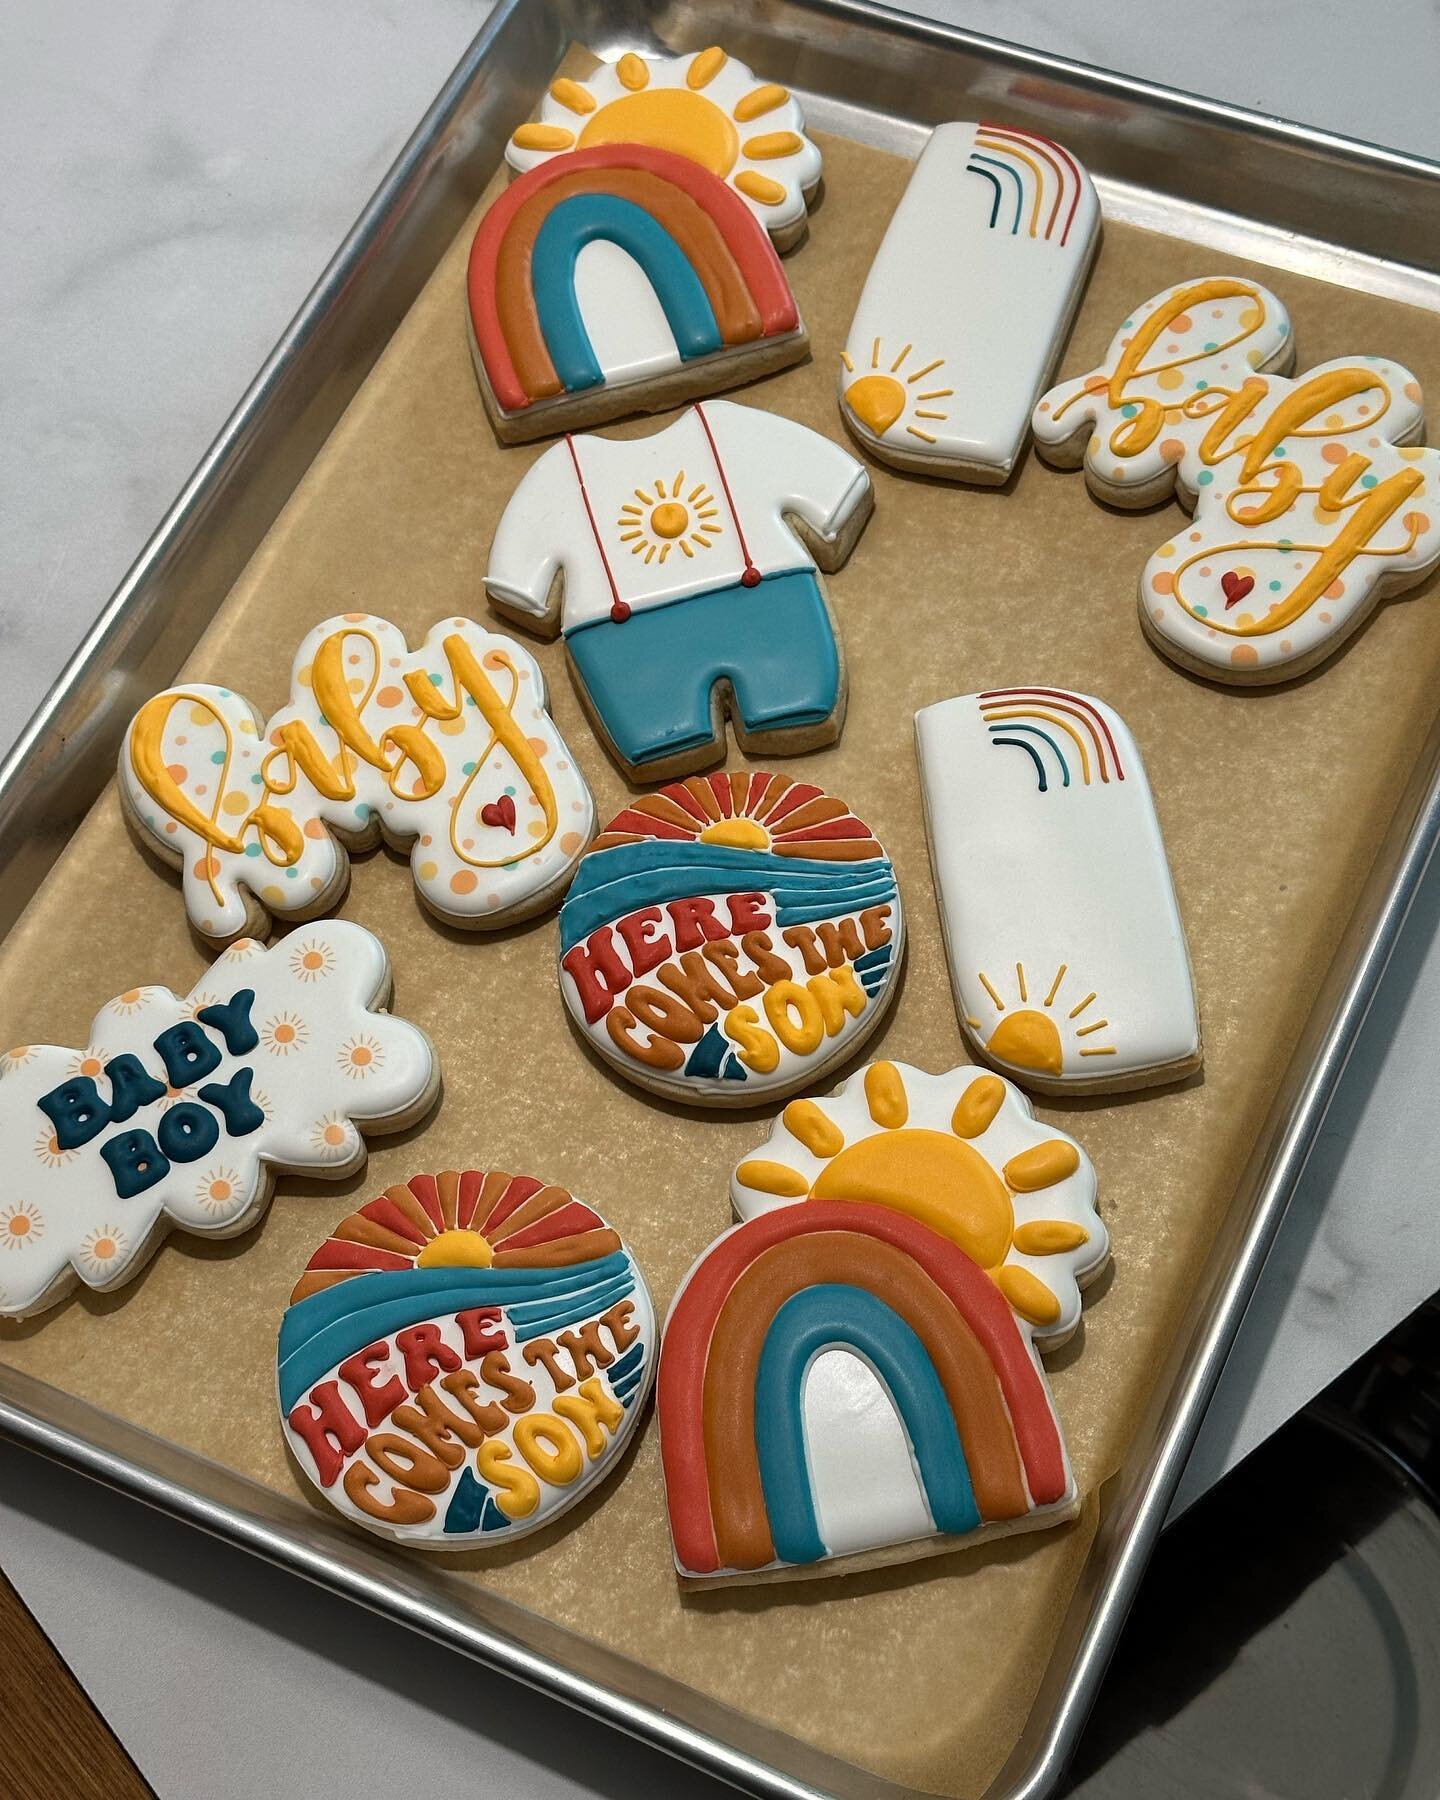 Here comes the son! ☀️👶🏼Such a great baby shower theme and even cuter cookies! #HereComesTheSon #BabyShowerCookies #RetroCookies #RetroBabyShower #SugarCookies #Homemade #RoyalIcing #CustomCookies #HandDecoratedCookies #DecoratedCookies #DecoratedS